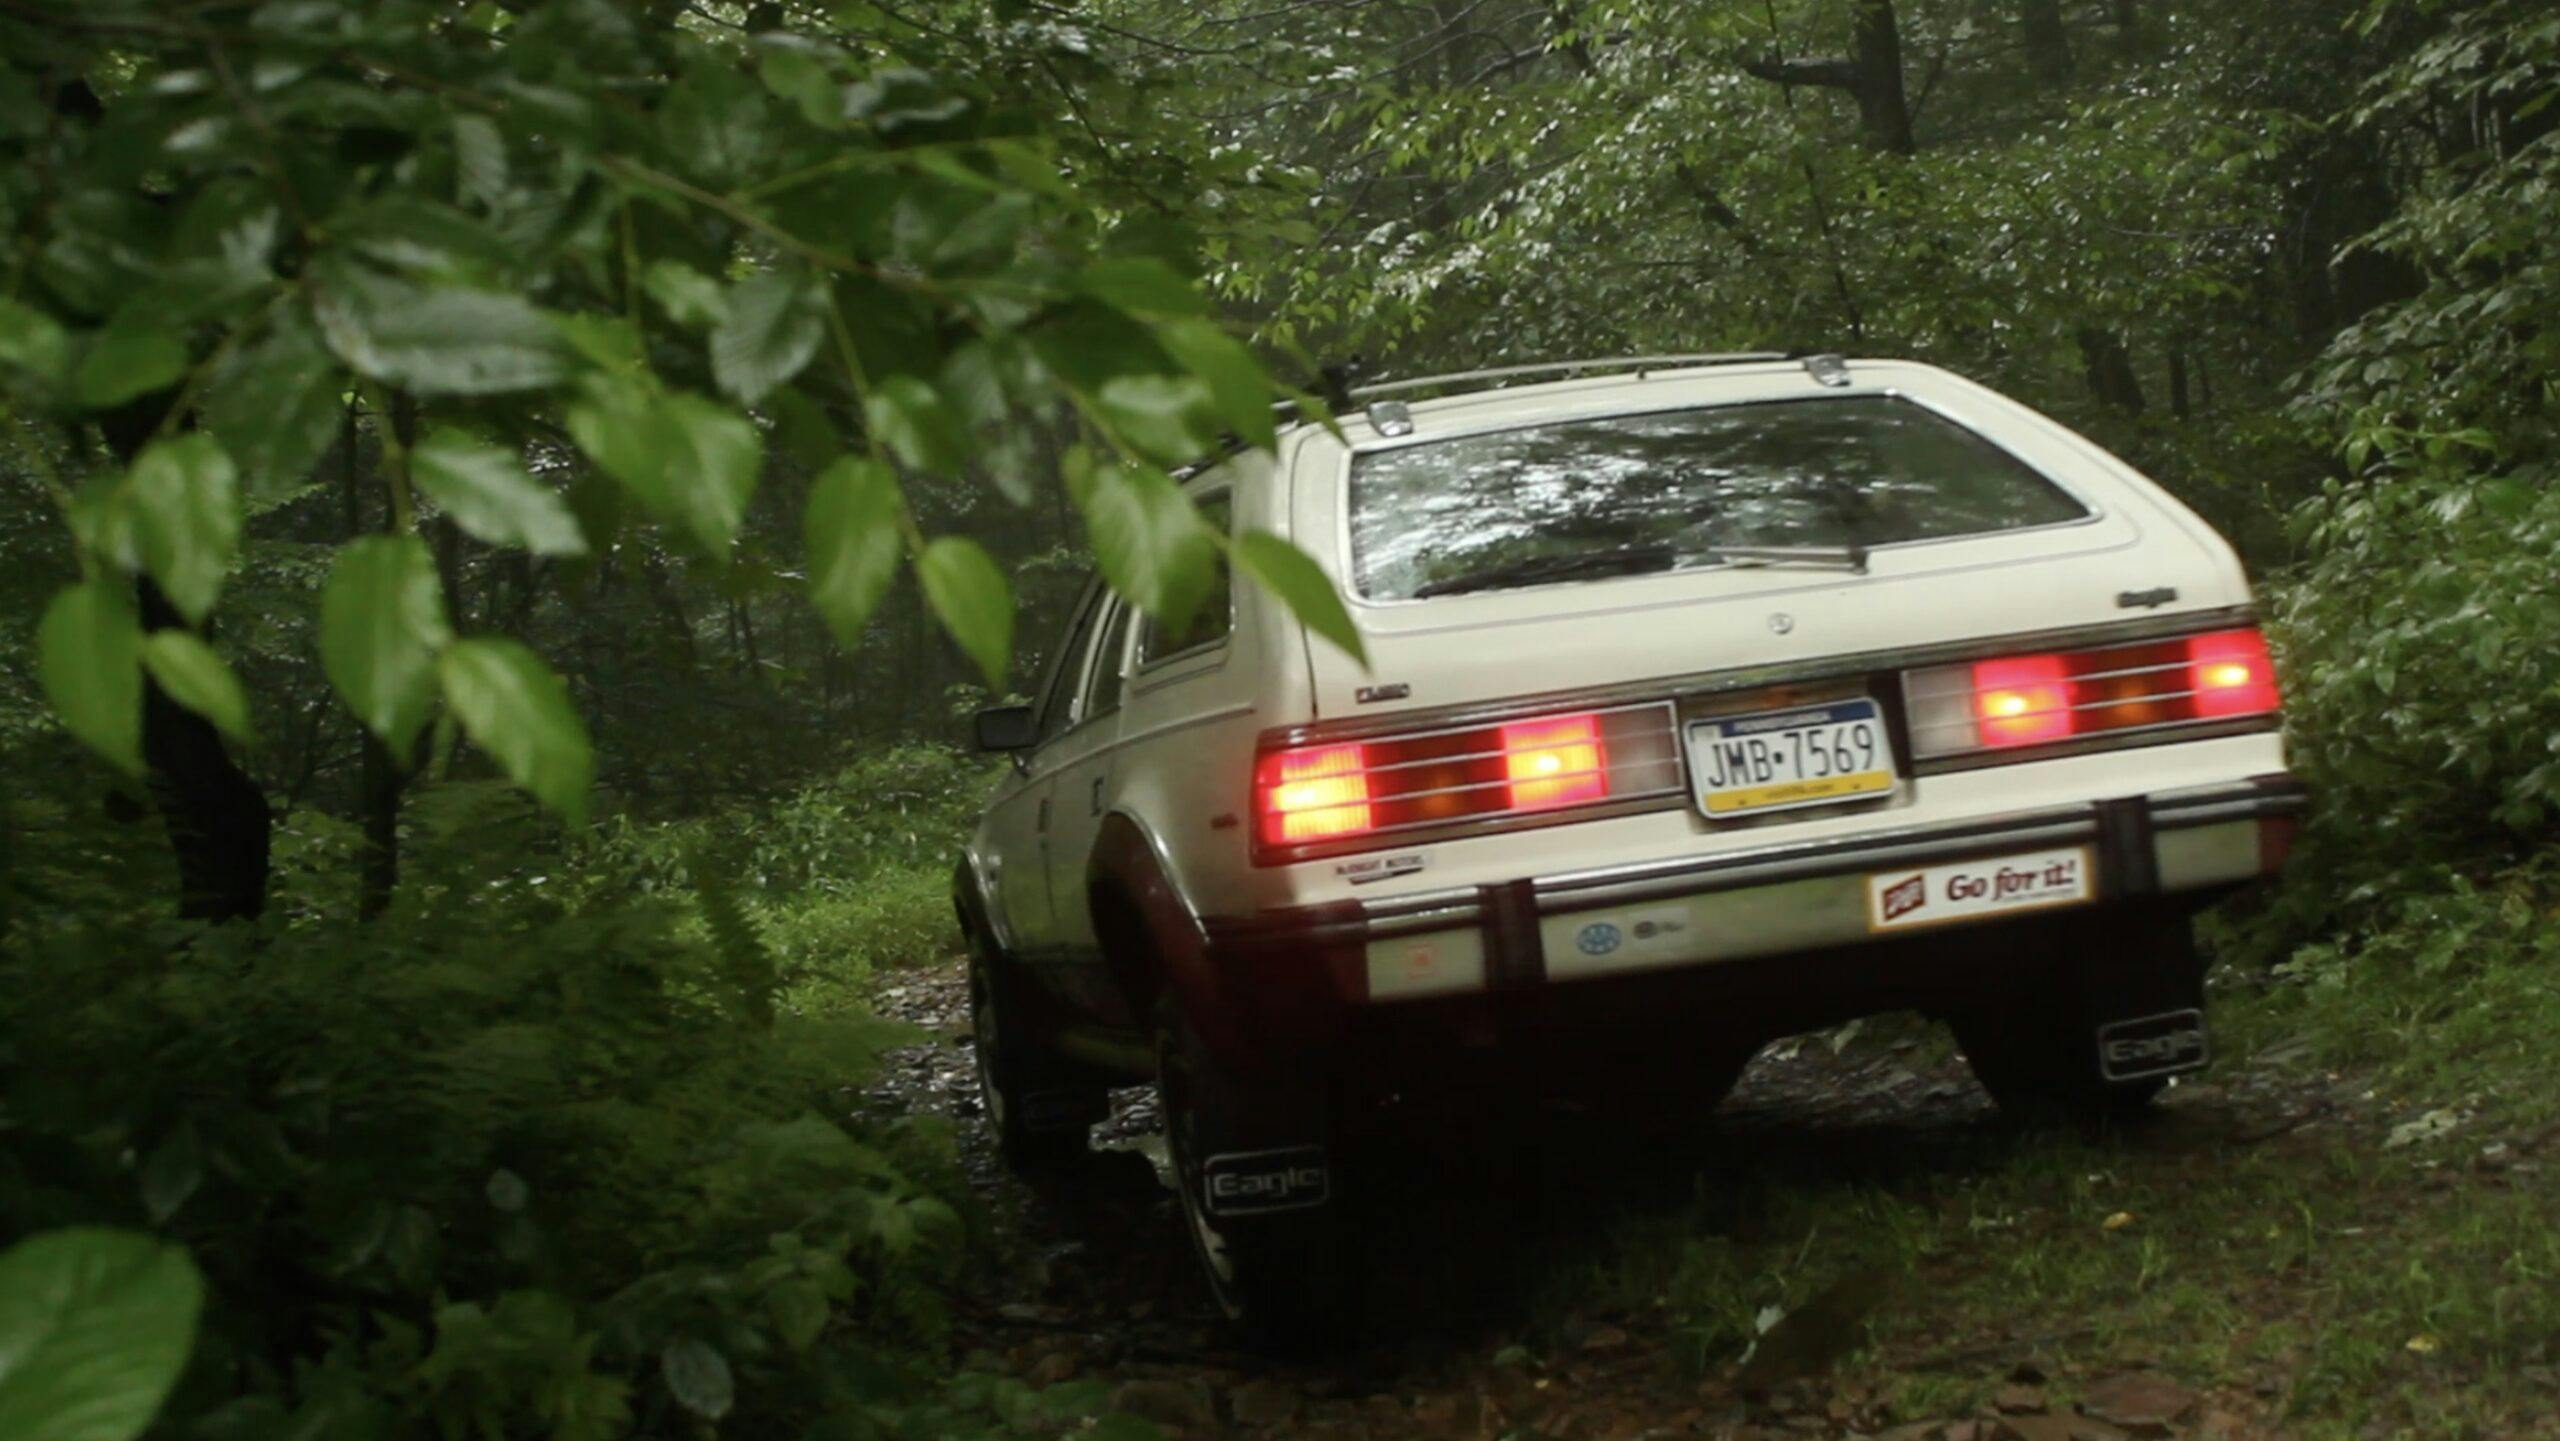 1986 AMC Eagle off road descent in the forest